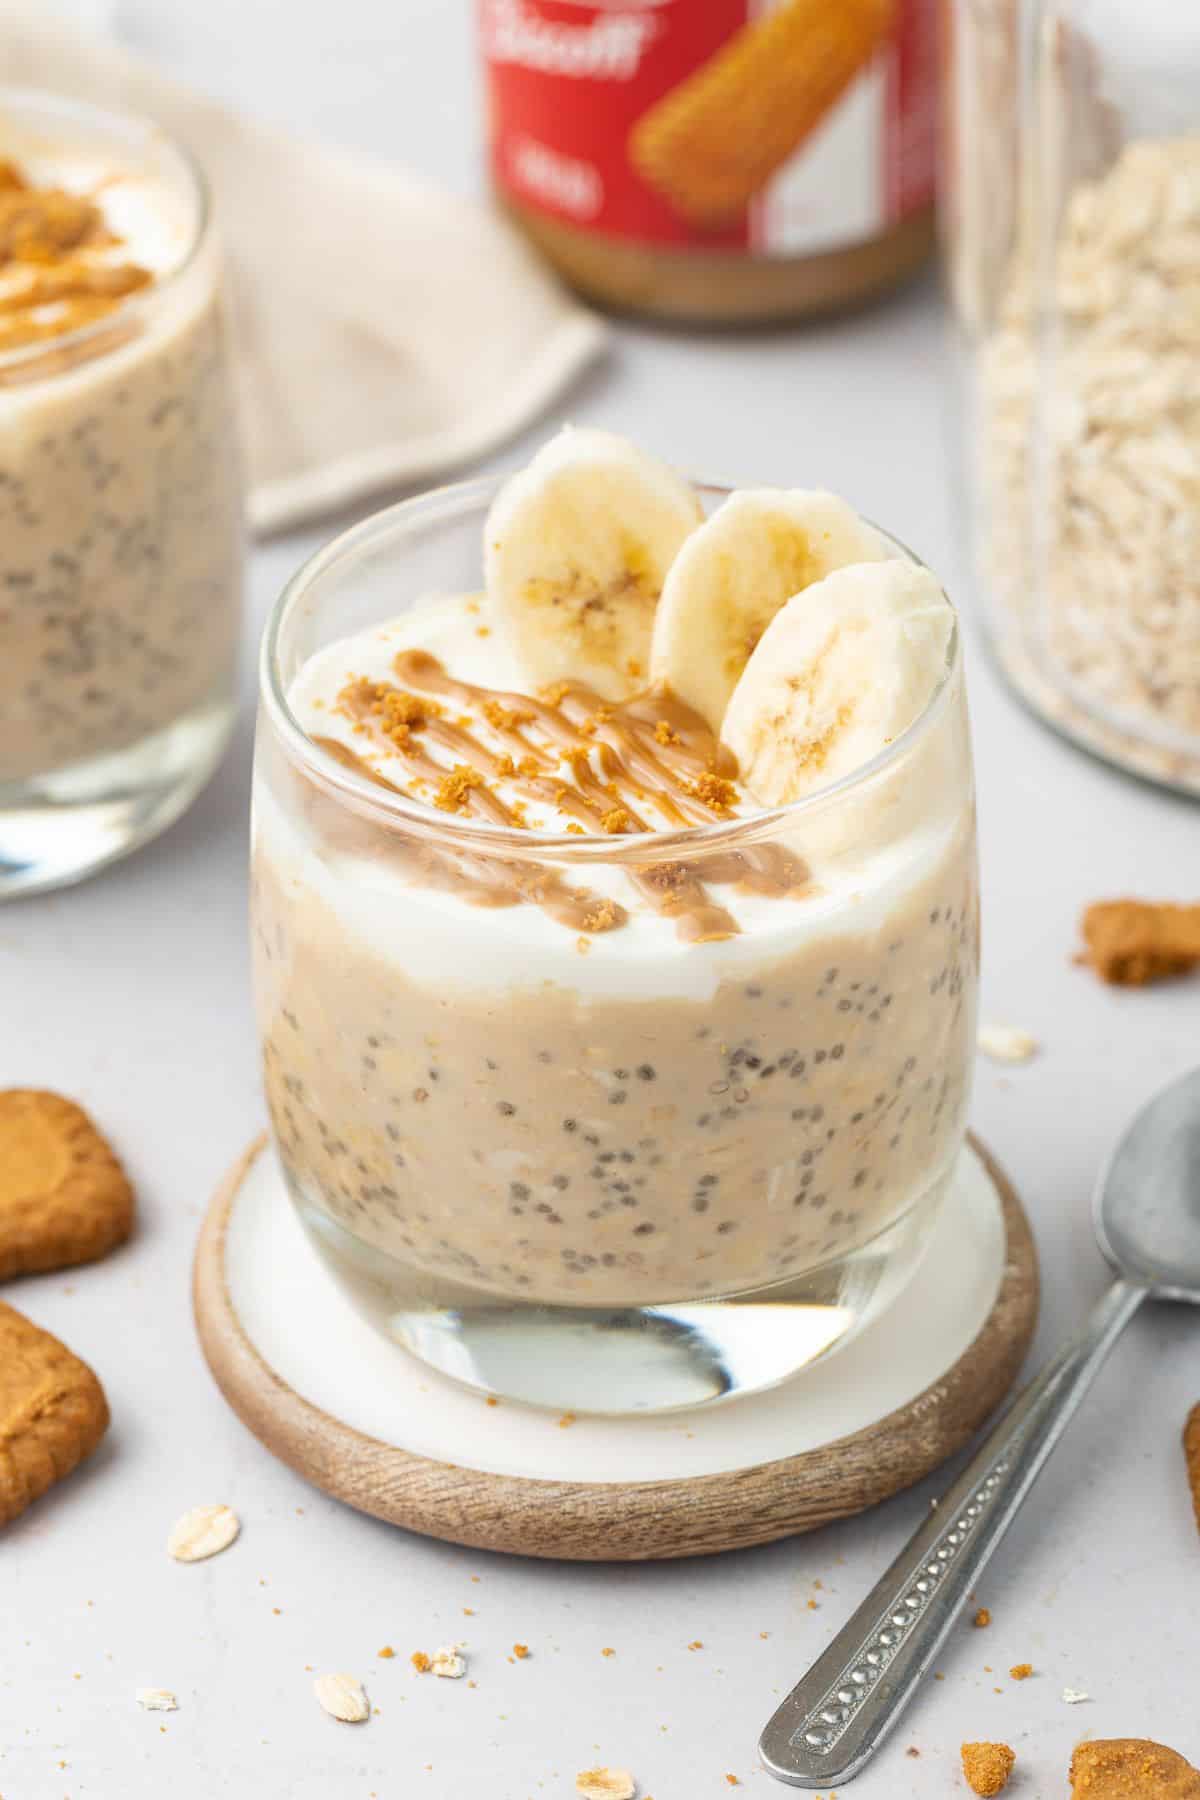 Glass jar of overnight oats topped with yoghurt, slices of banana and a drizzle of Biscoff spread, sitting on a round coaster.